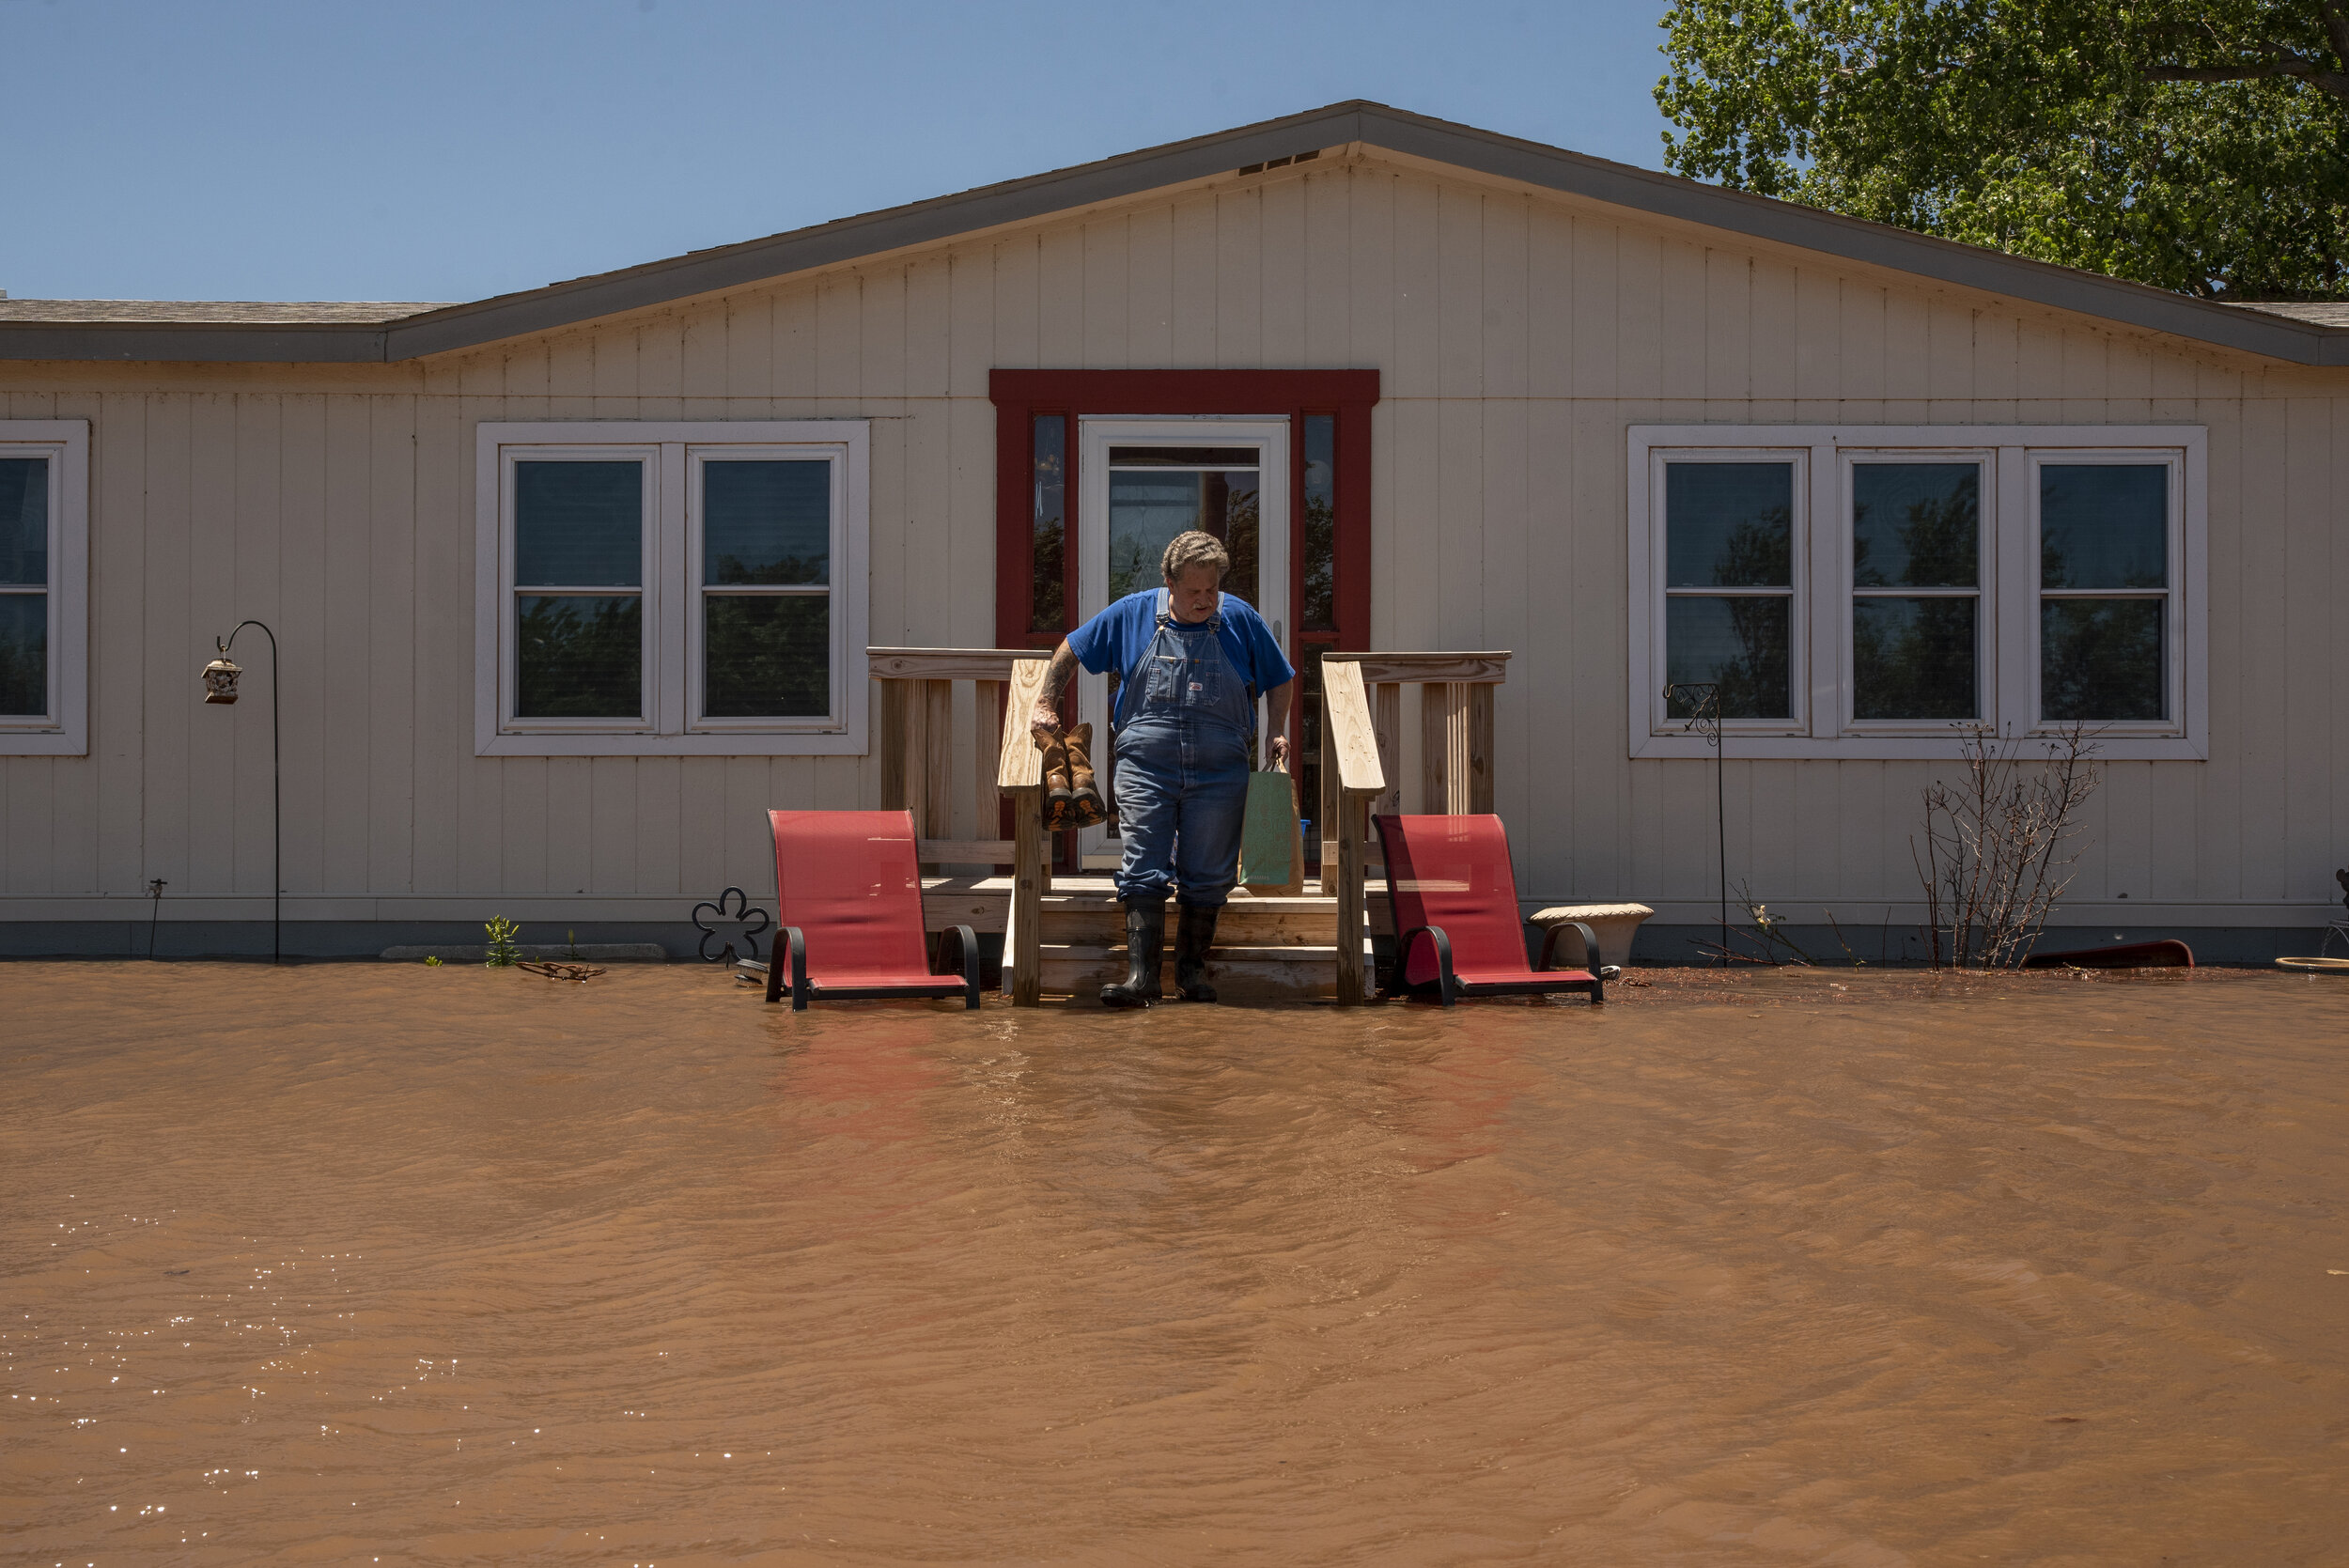  Teri Smith retrieves important belongings as floodwaters rise around his home in Yukon.  Nick Oxford for The New York Times 